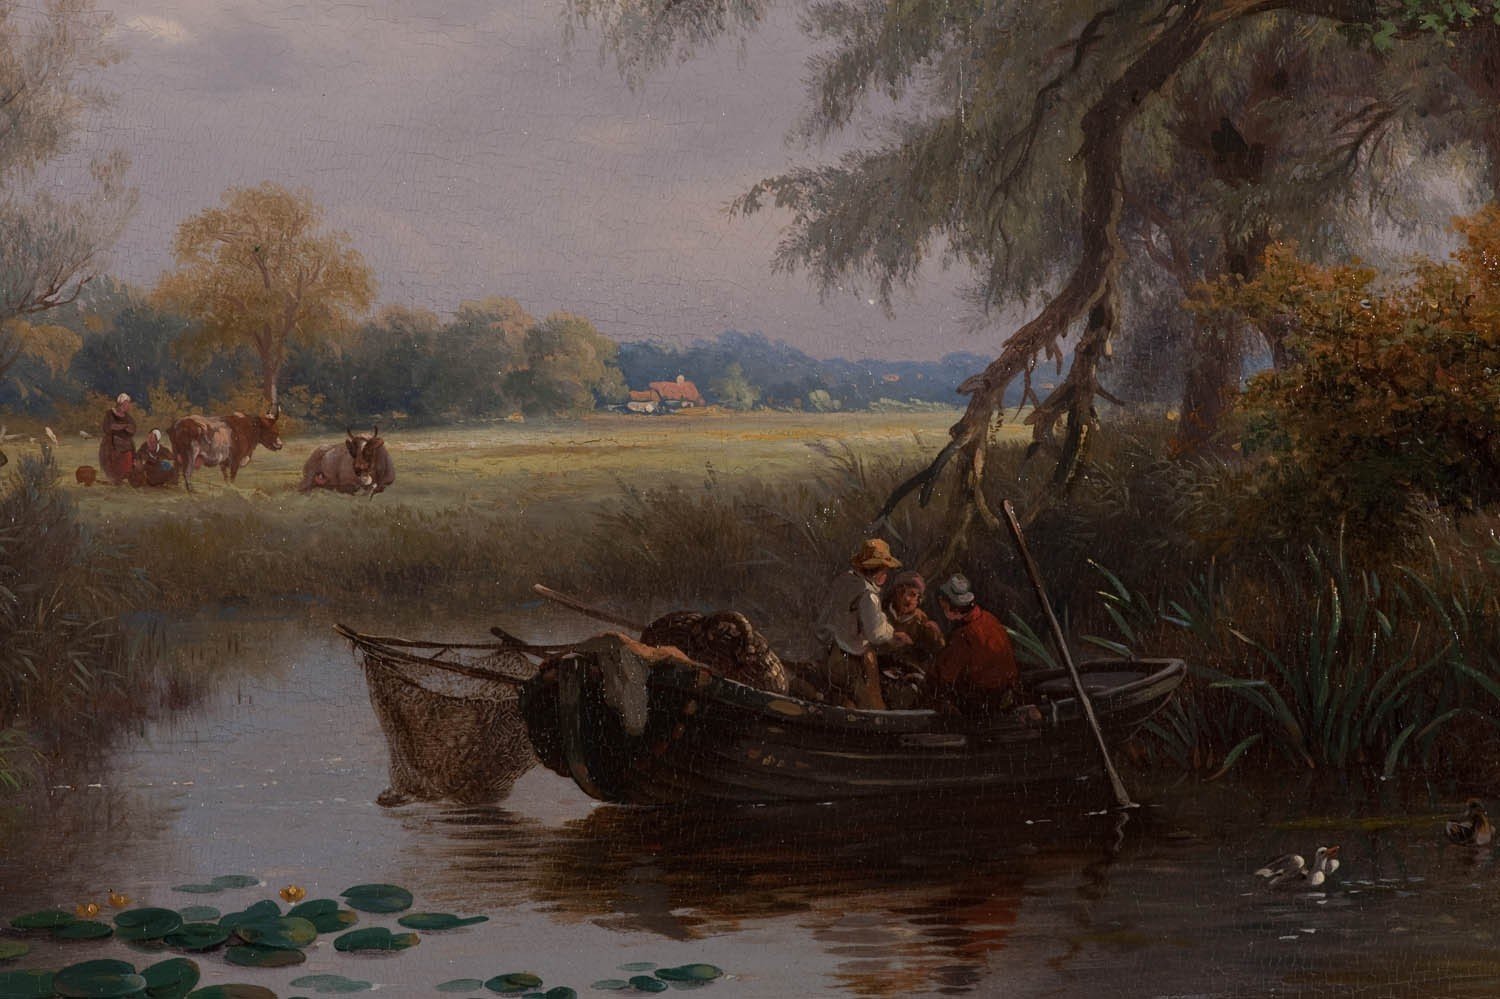 painting, Lily pads, Boat, Field, Cows, Fishing, Classic art Wallpaper